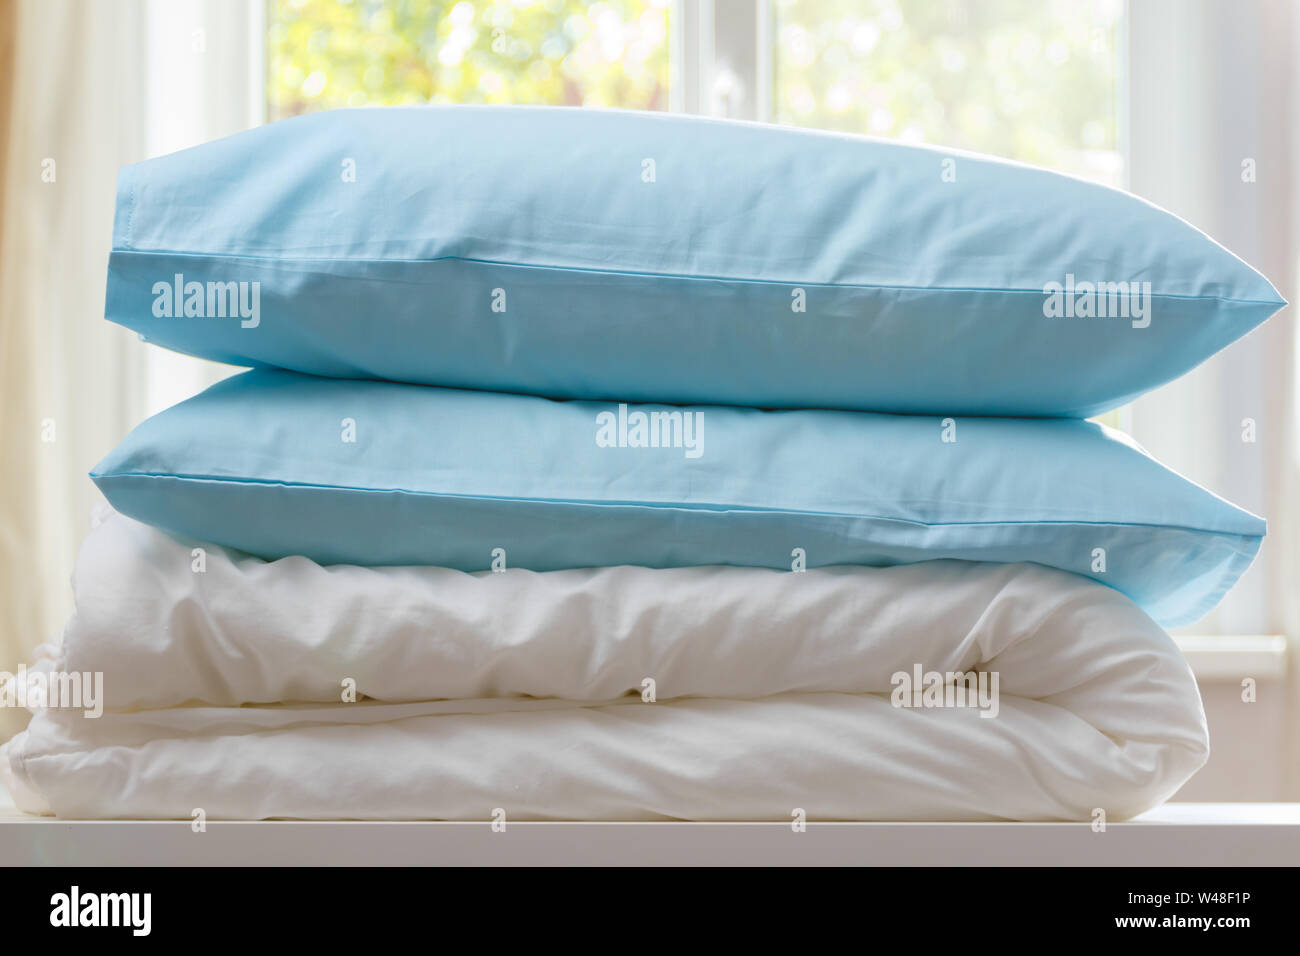 A folded duvet and pillows lie on a dresser against the background of a blurred window. Household. Stock Photo